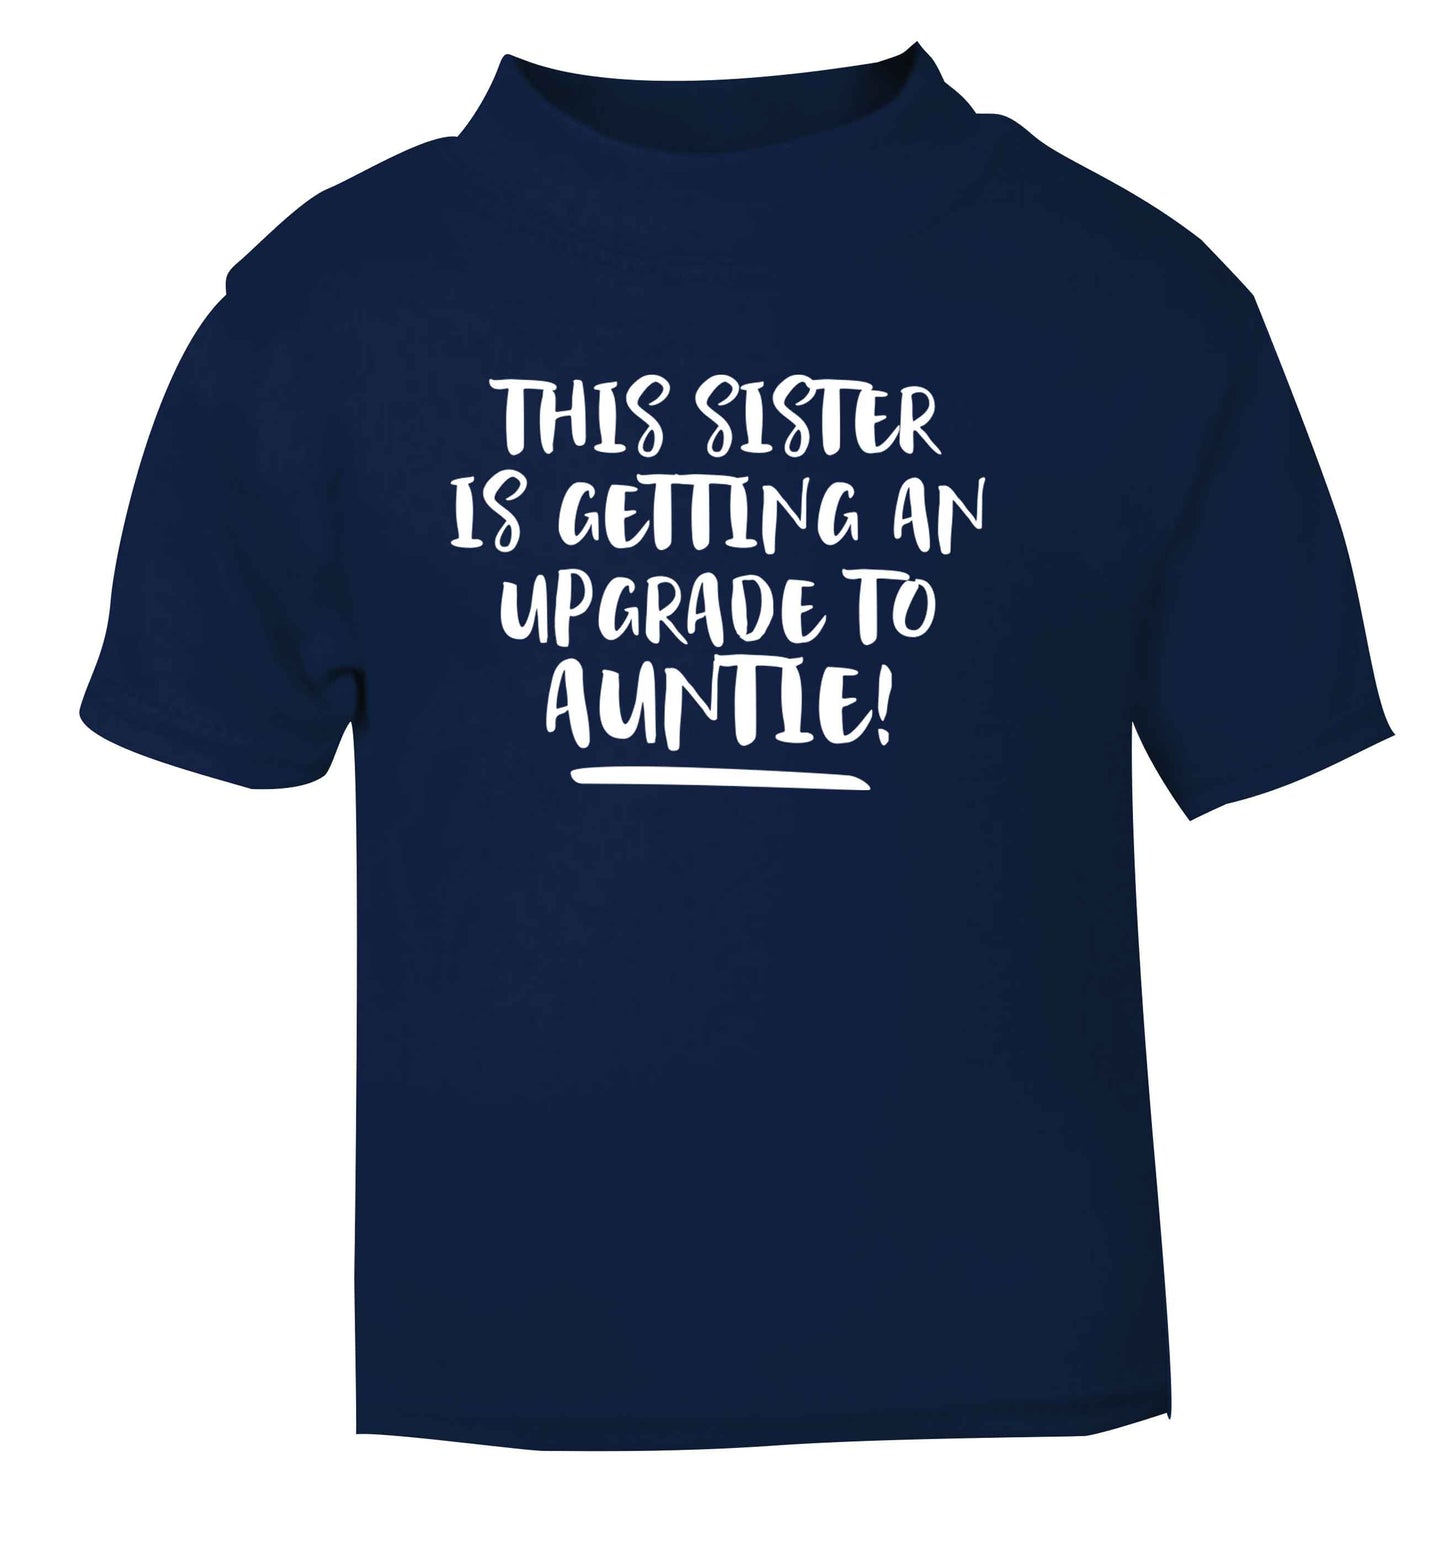 This sister is getting an upgrade to auntie! navy Baby Toddler Tshirt 2 Years